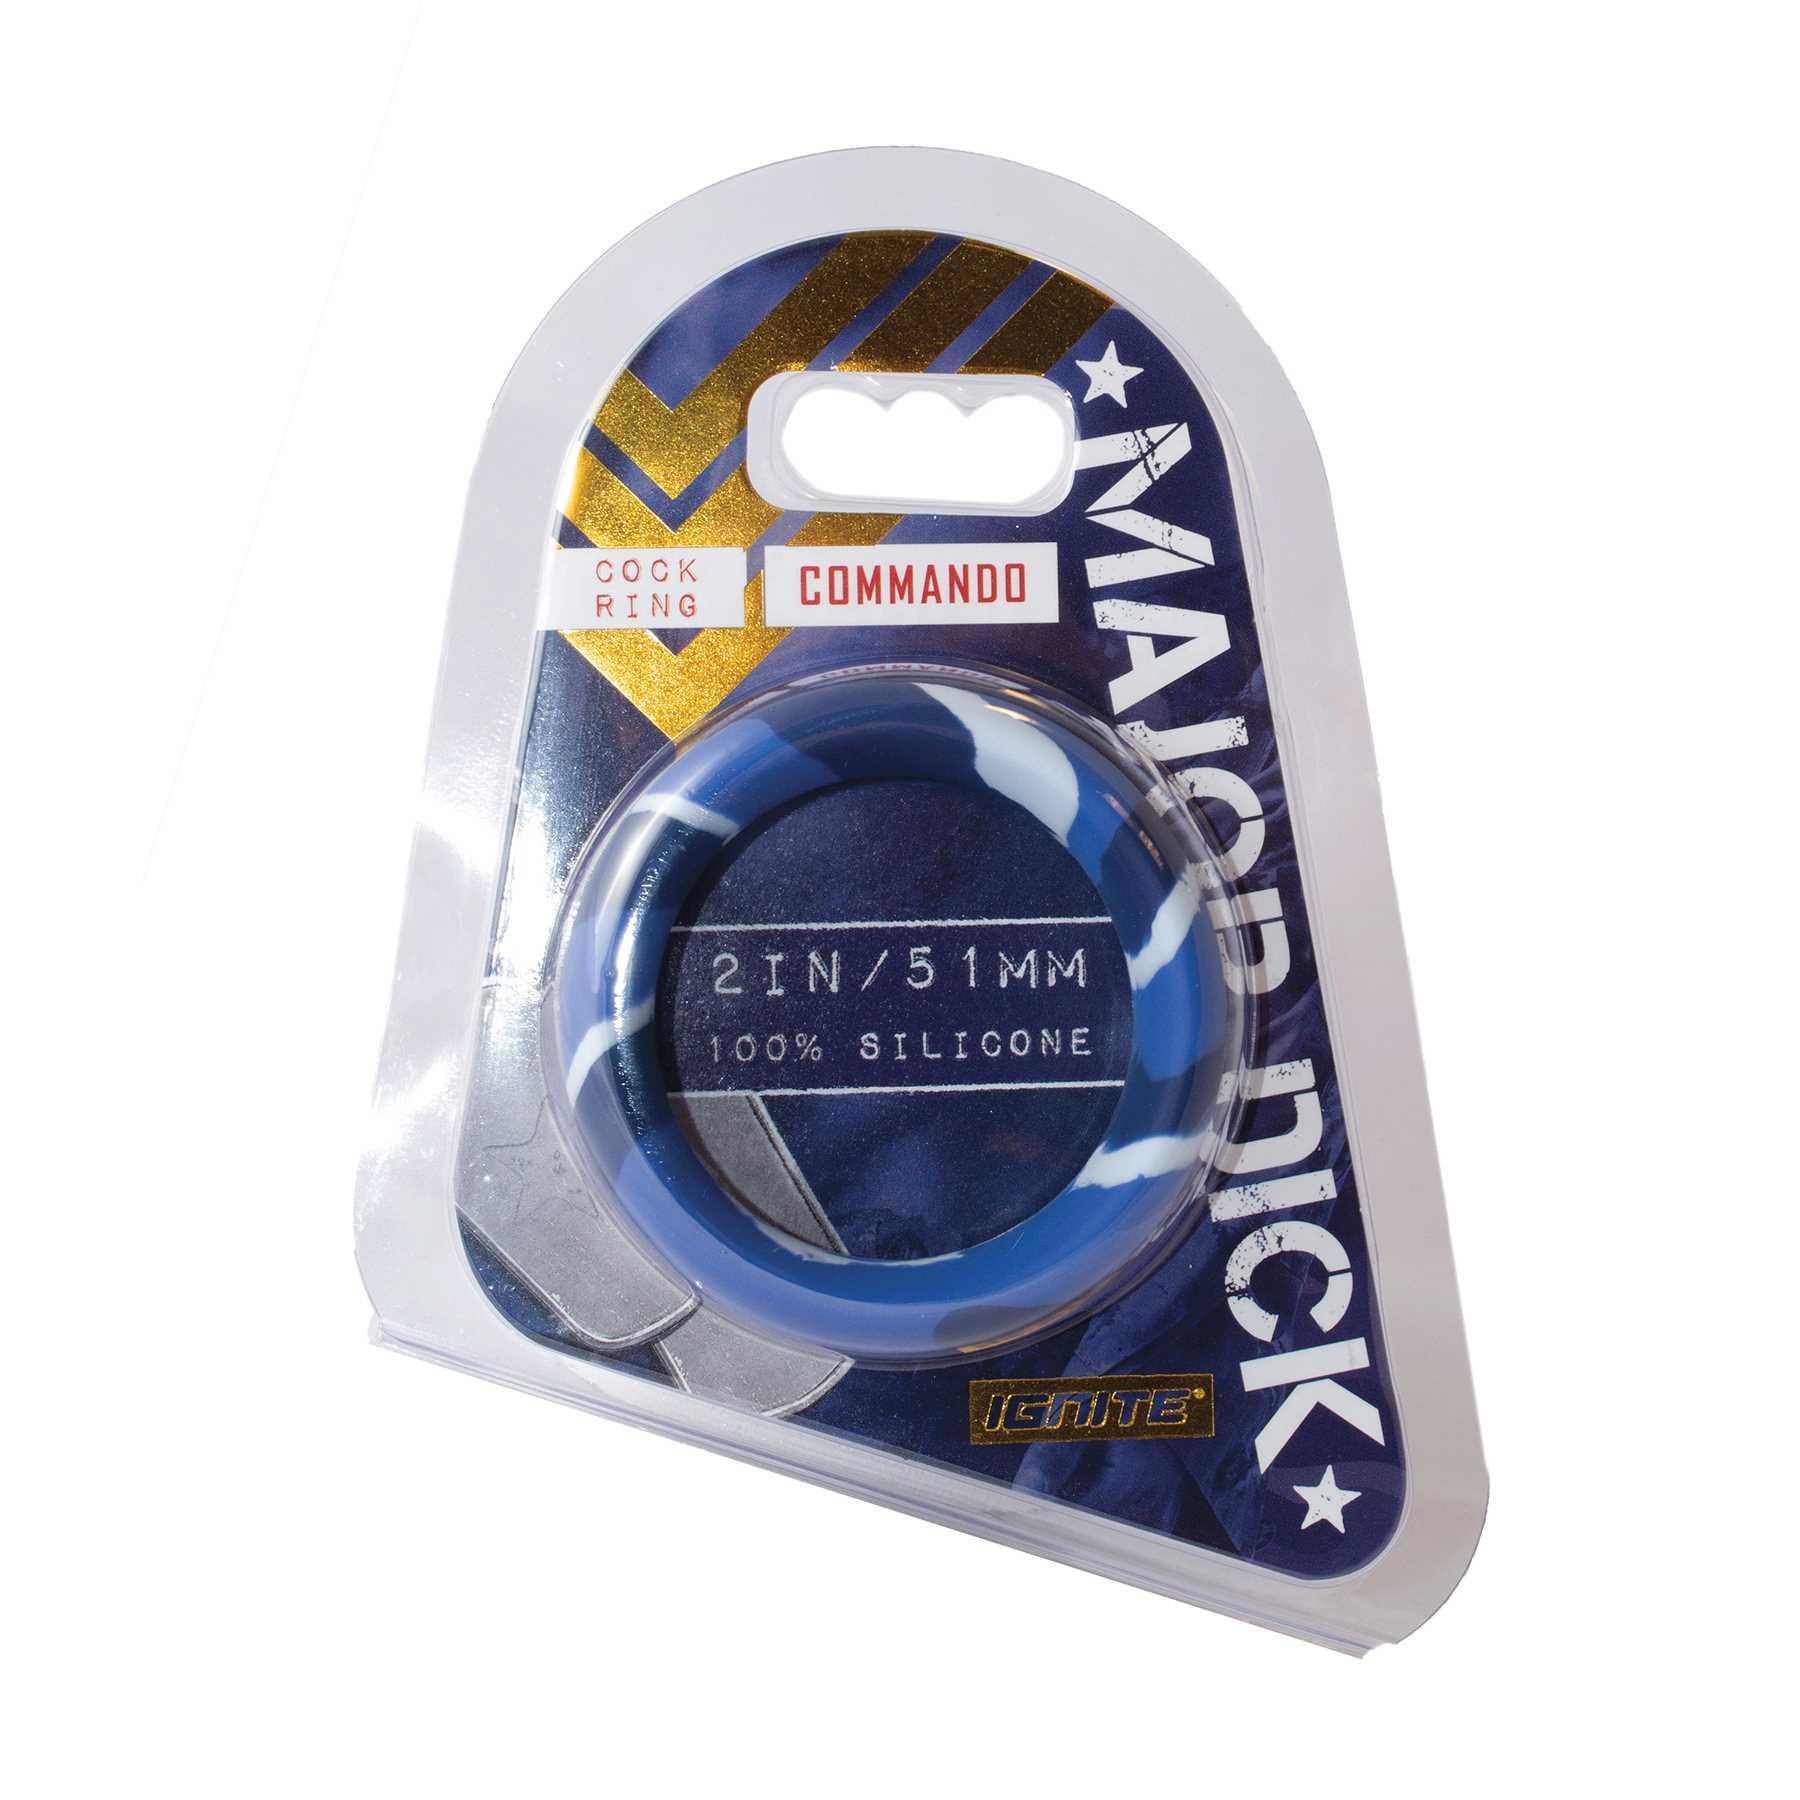  Major Dick Commando Cock Ring 2 Inch blue packaging